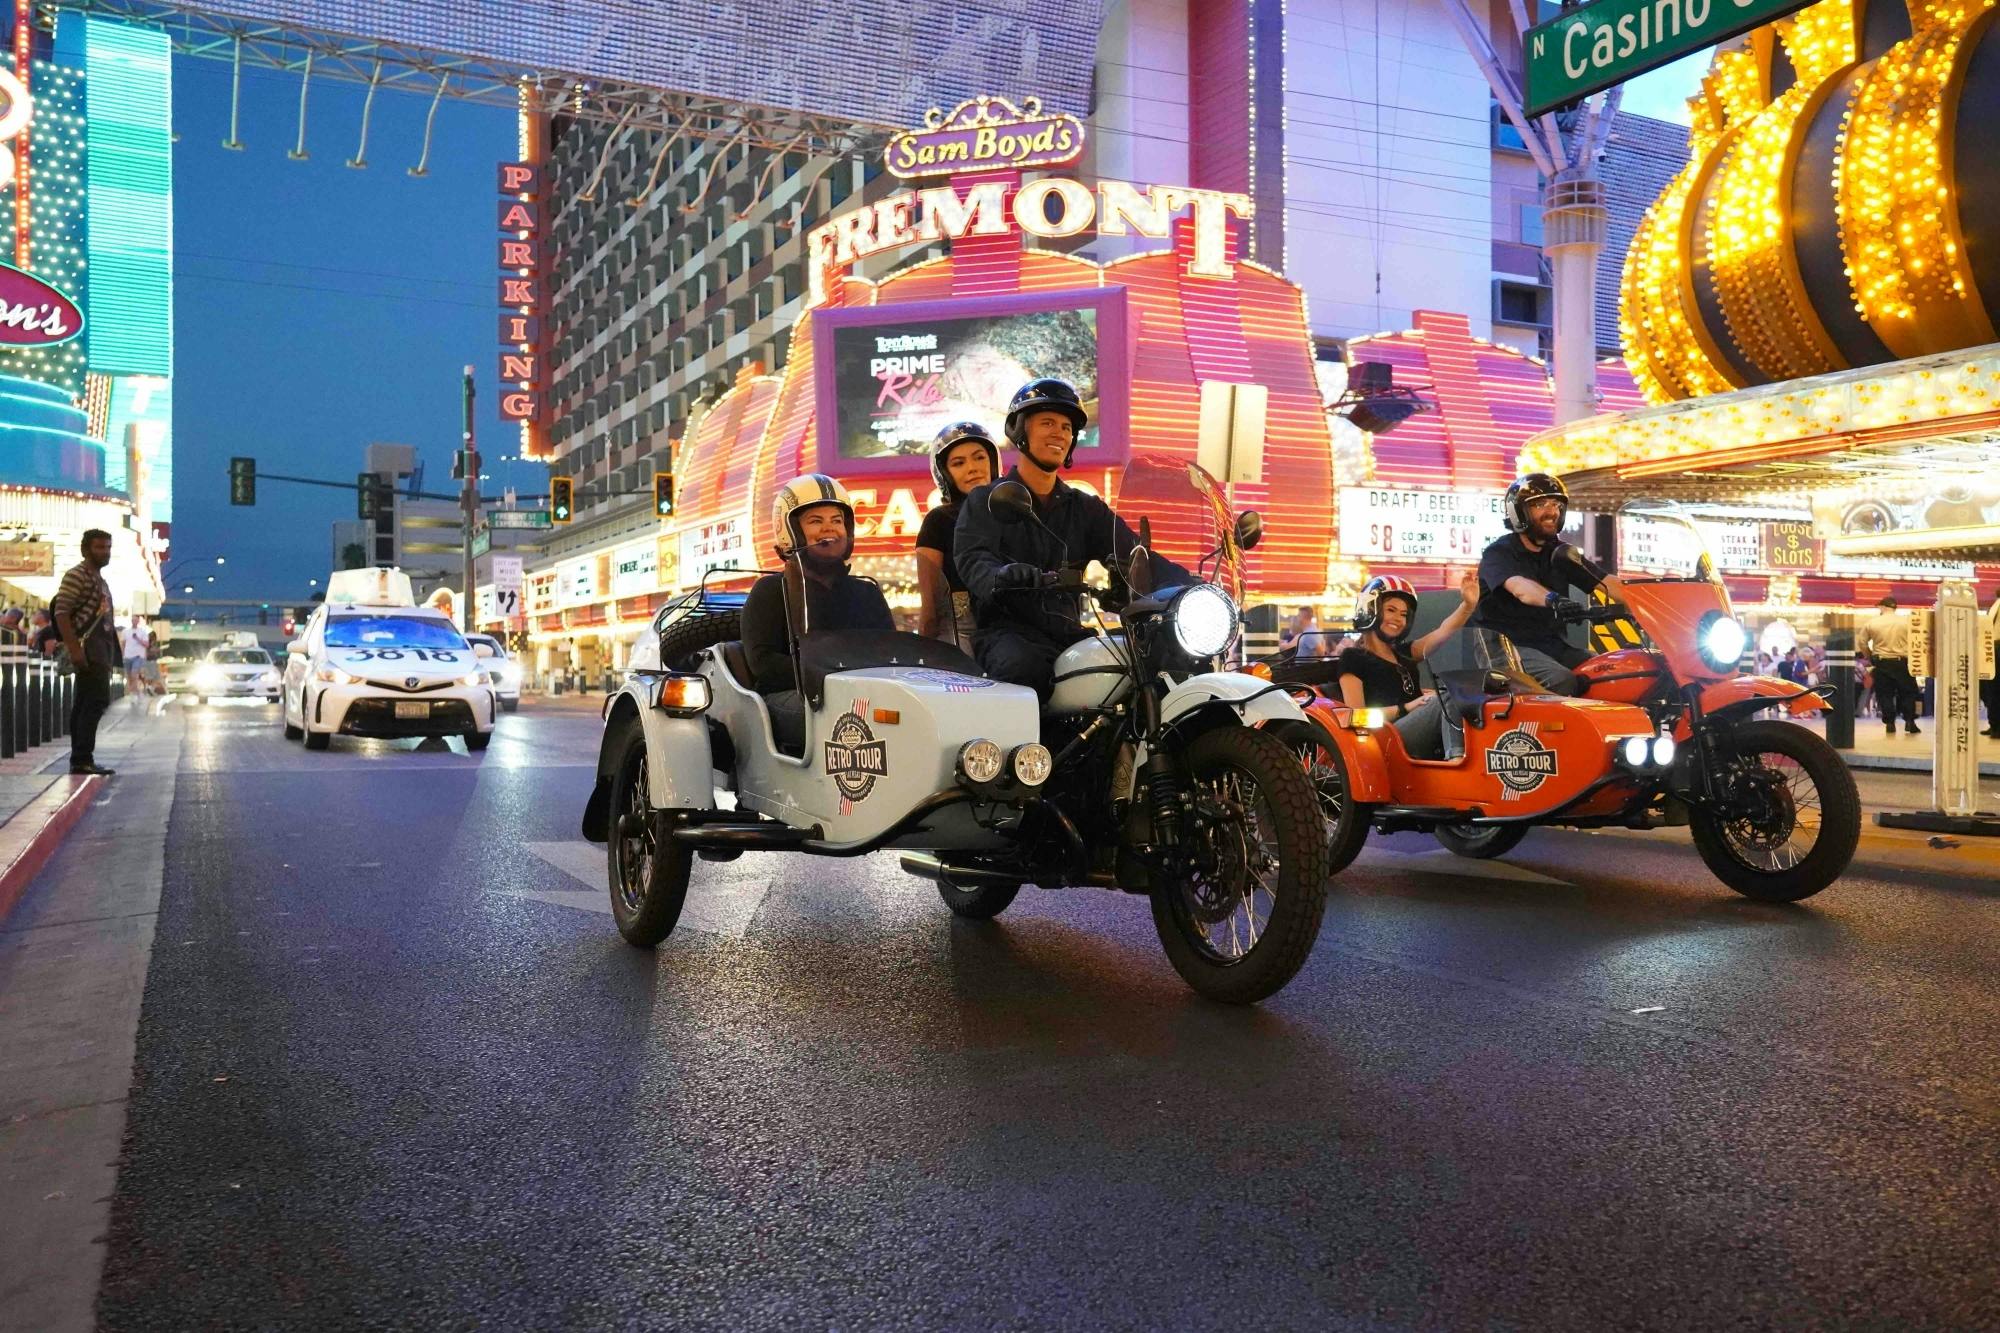 Private two-hour sidecar tour of Las Vegas nightlife